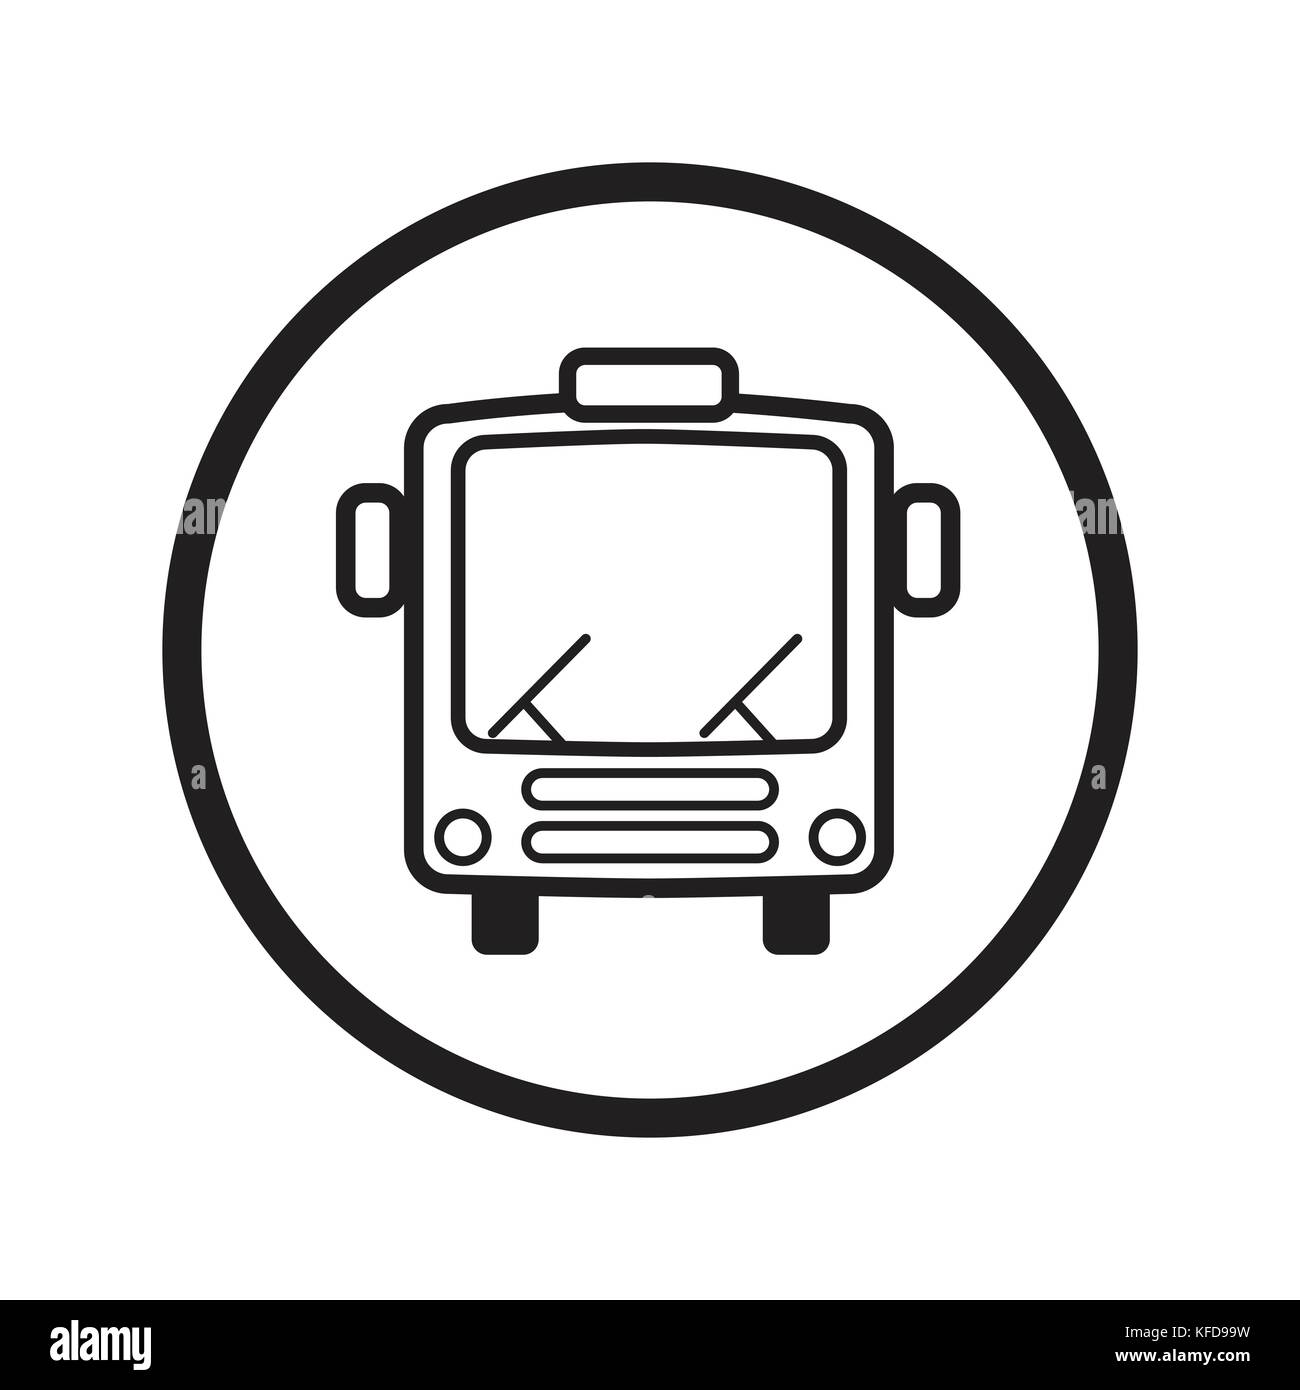 Linear Bus icon, Transportation iconic symbol inside a circle, on white background. Vector Iconic Design. Stock Vector